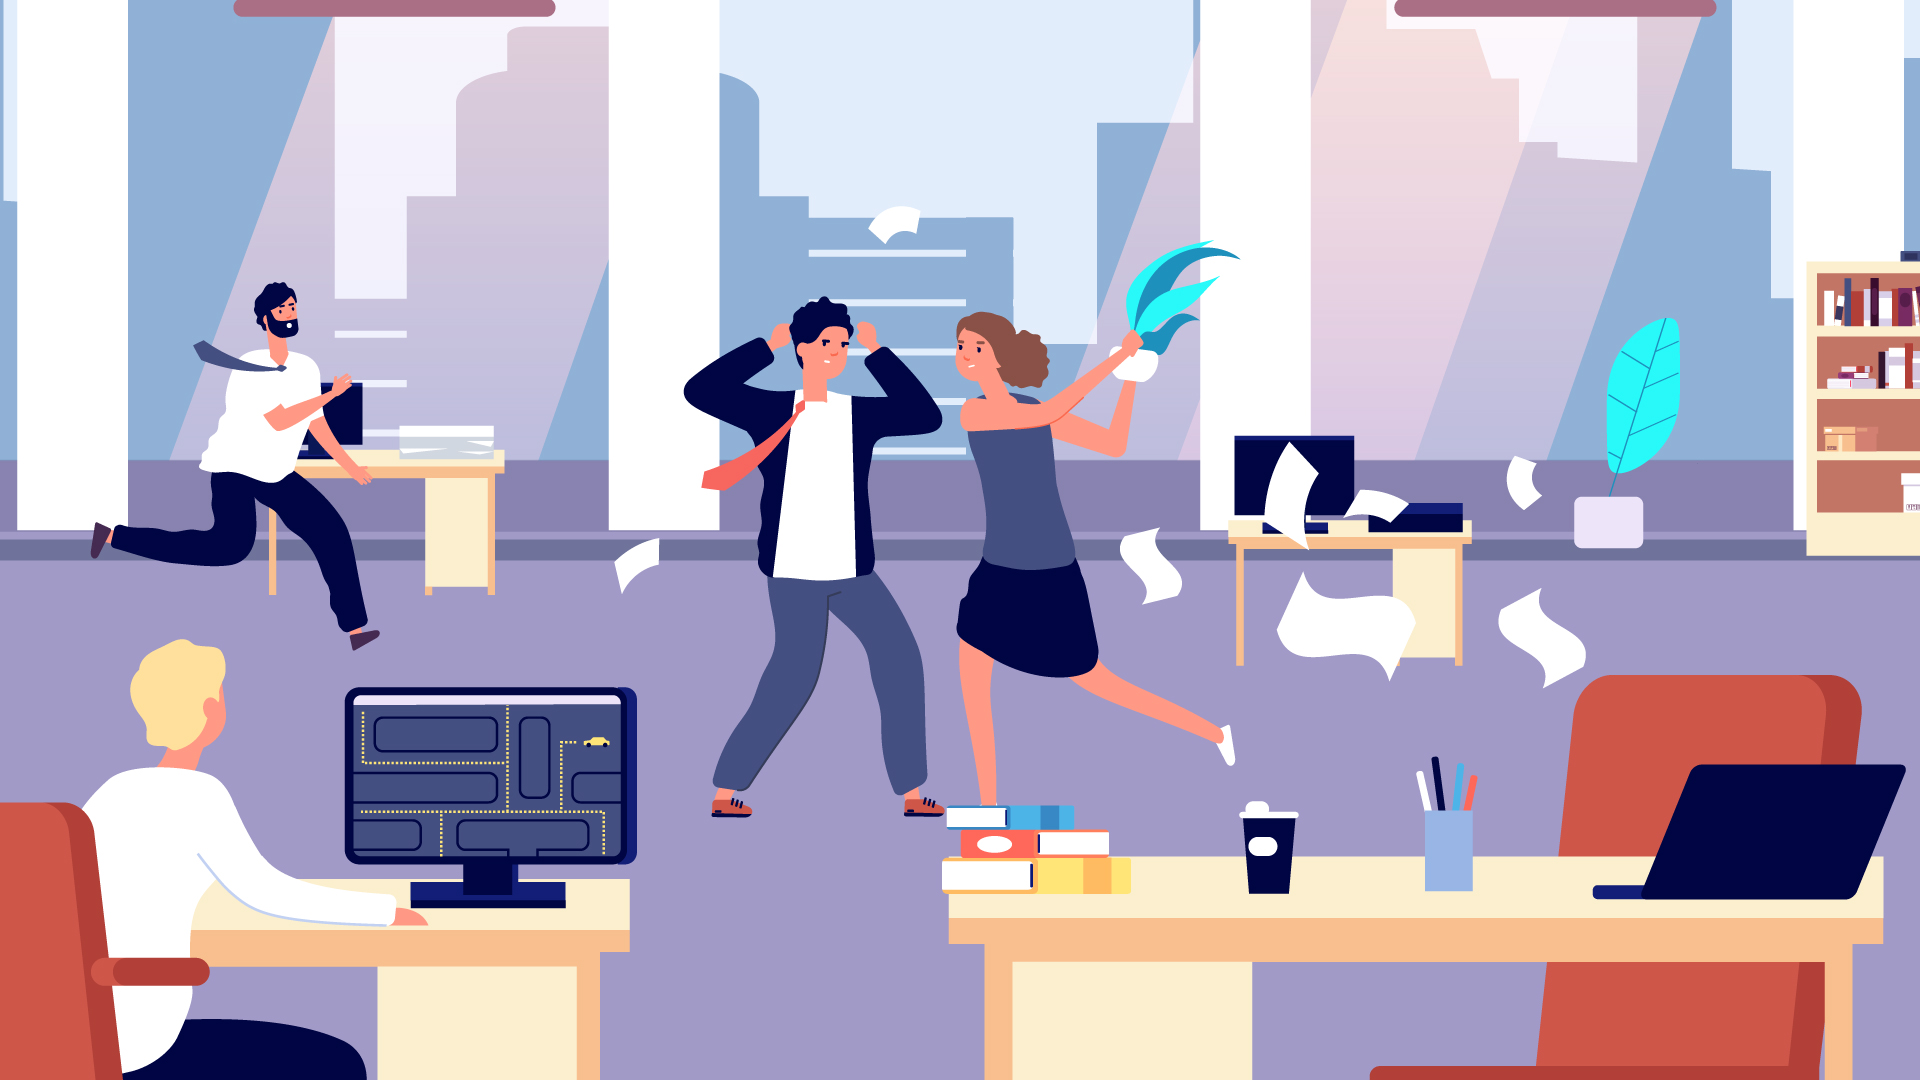 Man and woman fighting in the middle of office. Woman holding a vase about to throw it. Other people are in the office.